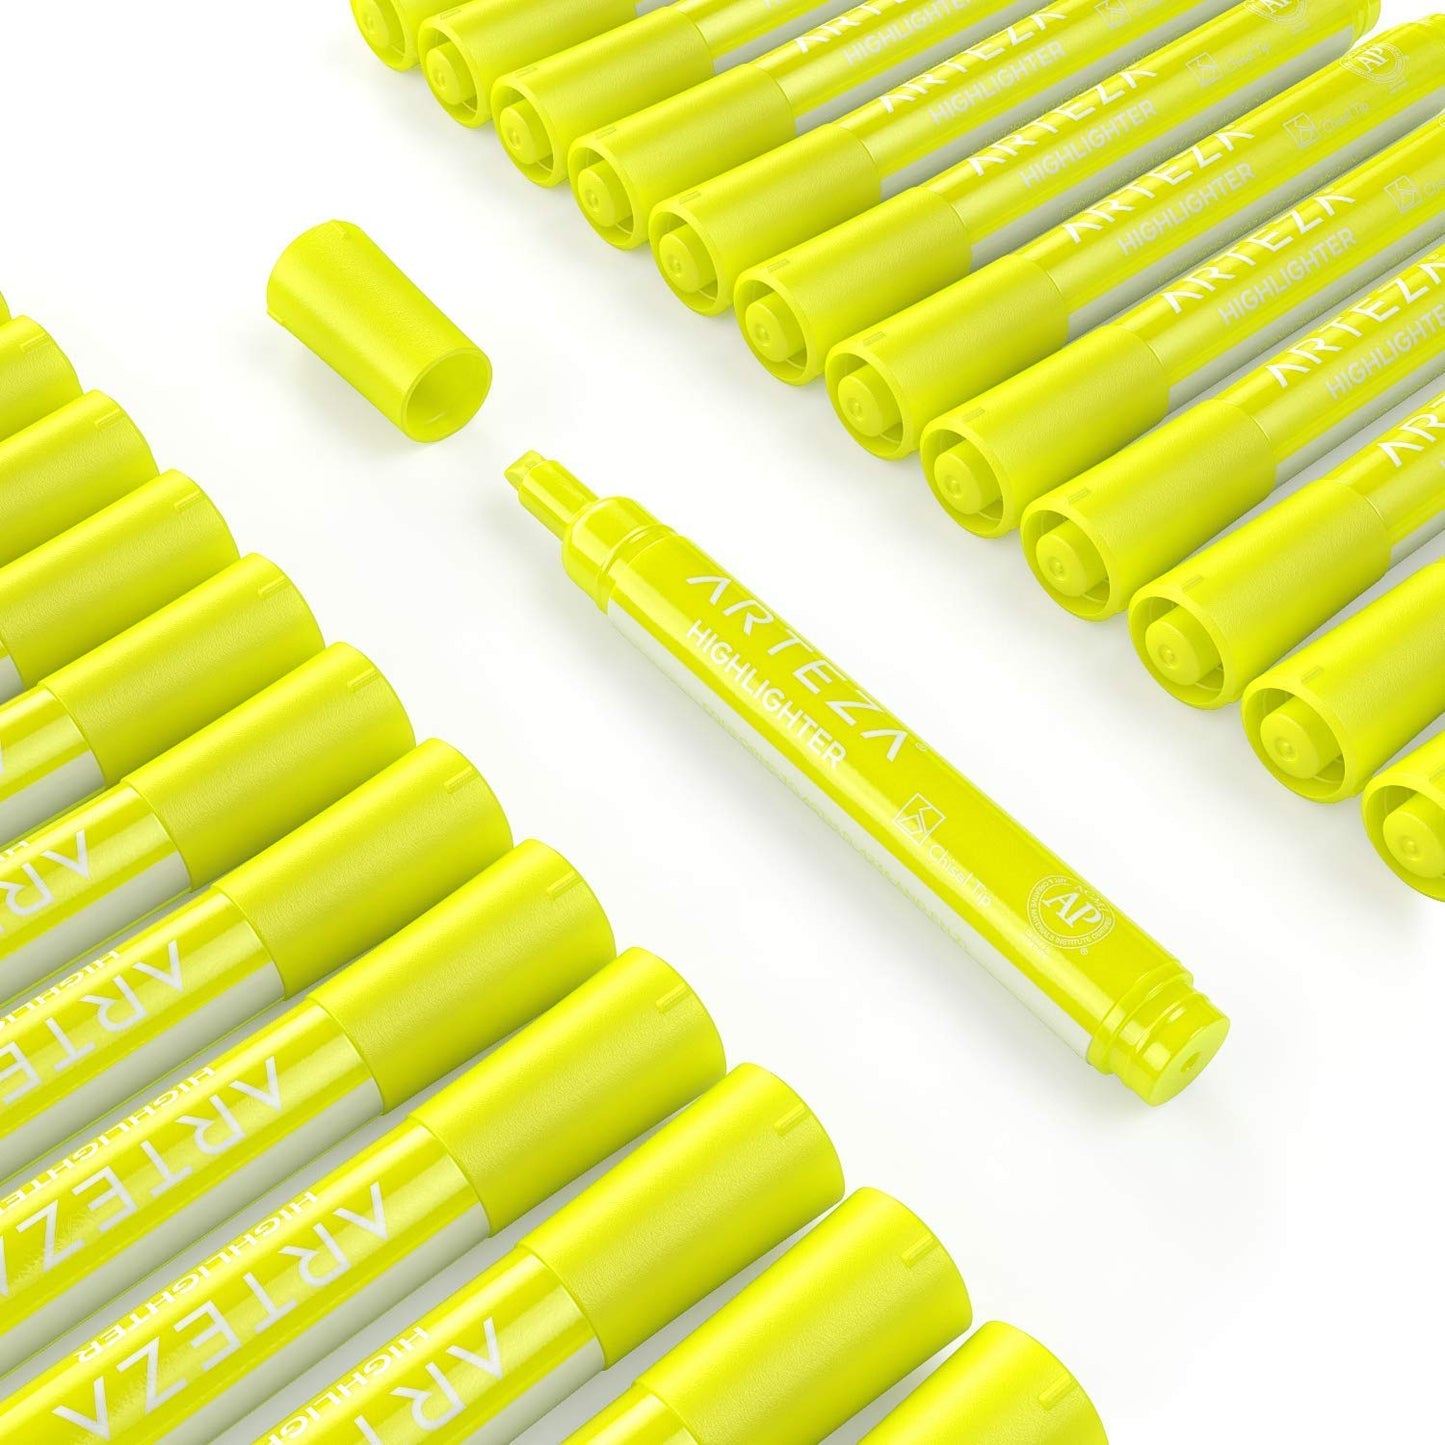 Arteza Highlighters, Yellow, Wide Chisel Tip - Set of 64